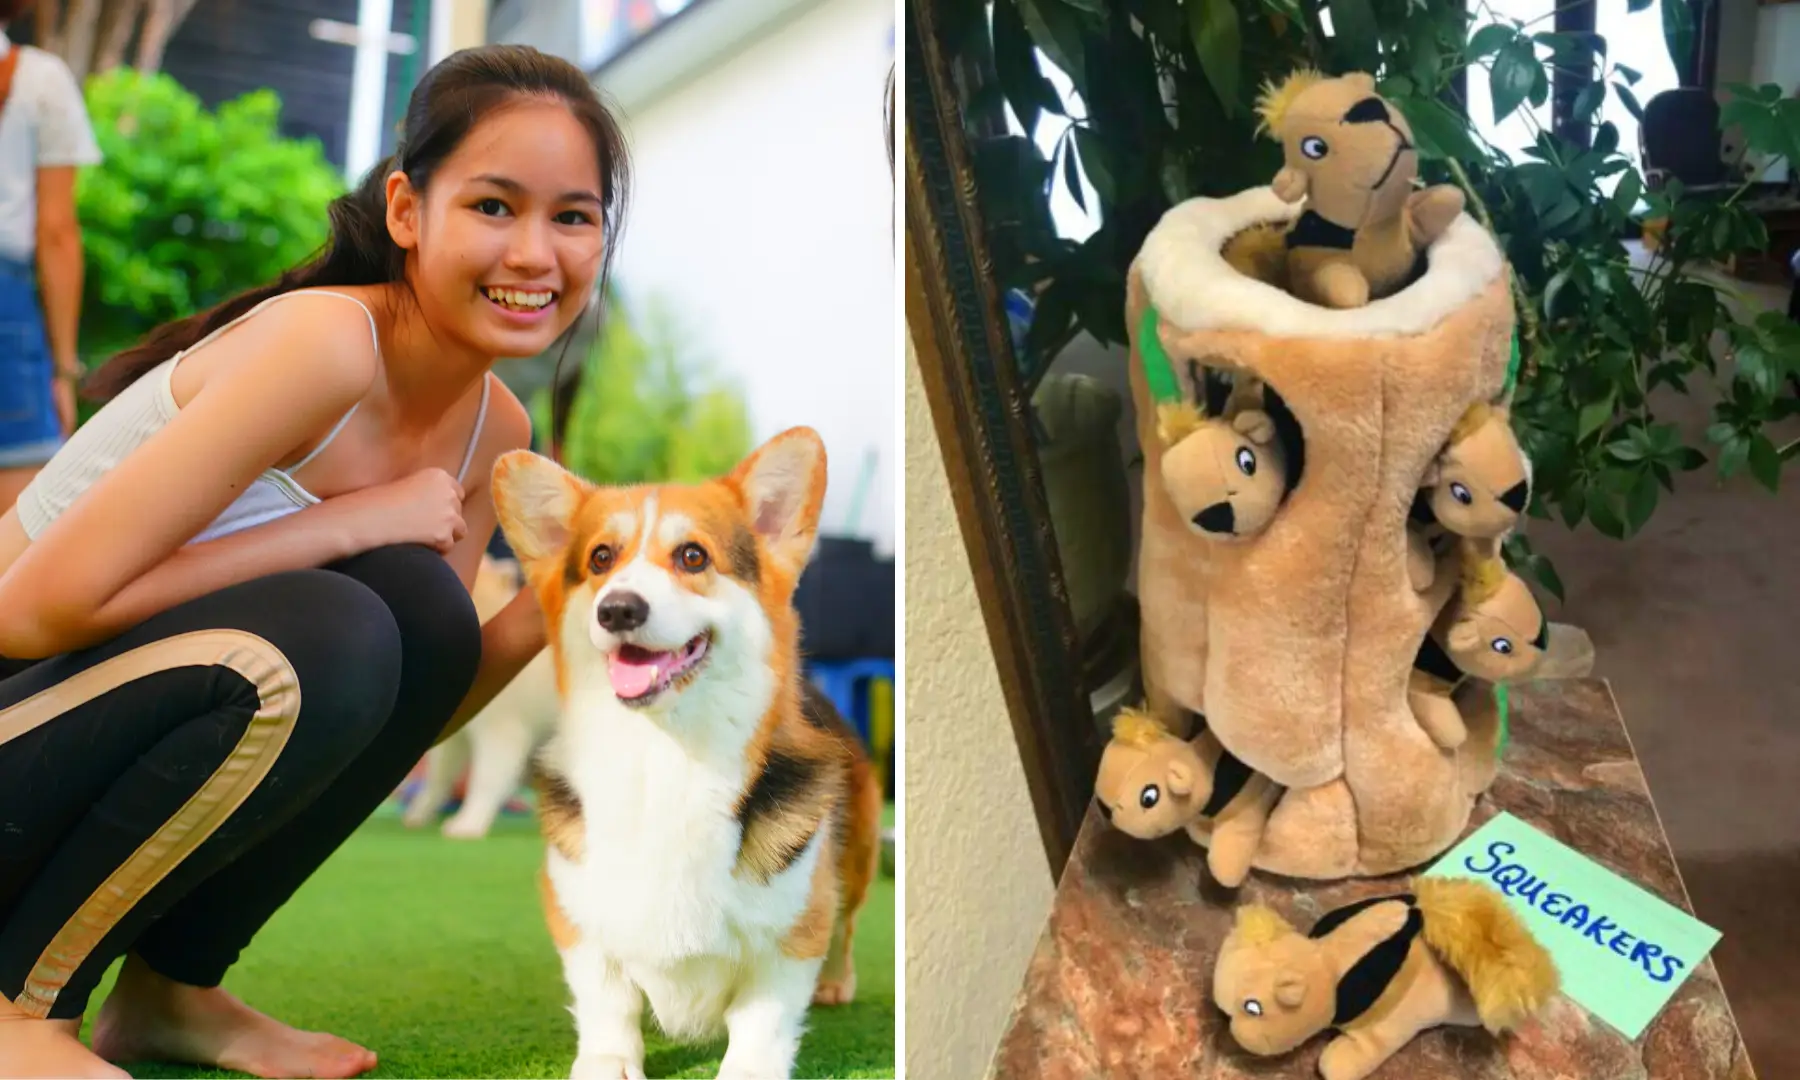 https://www.lumina.com.ph/assets/news-and-blogs-photos/Best-Dog-Toys-to-Keep-your-Furry-Friend-Busy-At-Home/Best-Dog-Toys-to-Keep-your-Furry-Friend-Busy-At-Home.webp